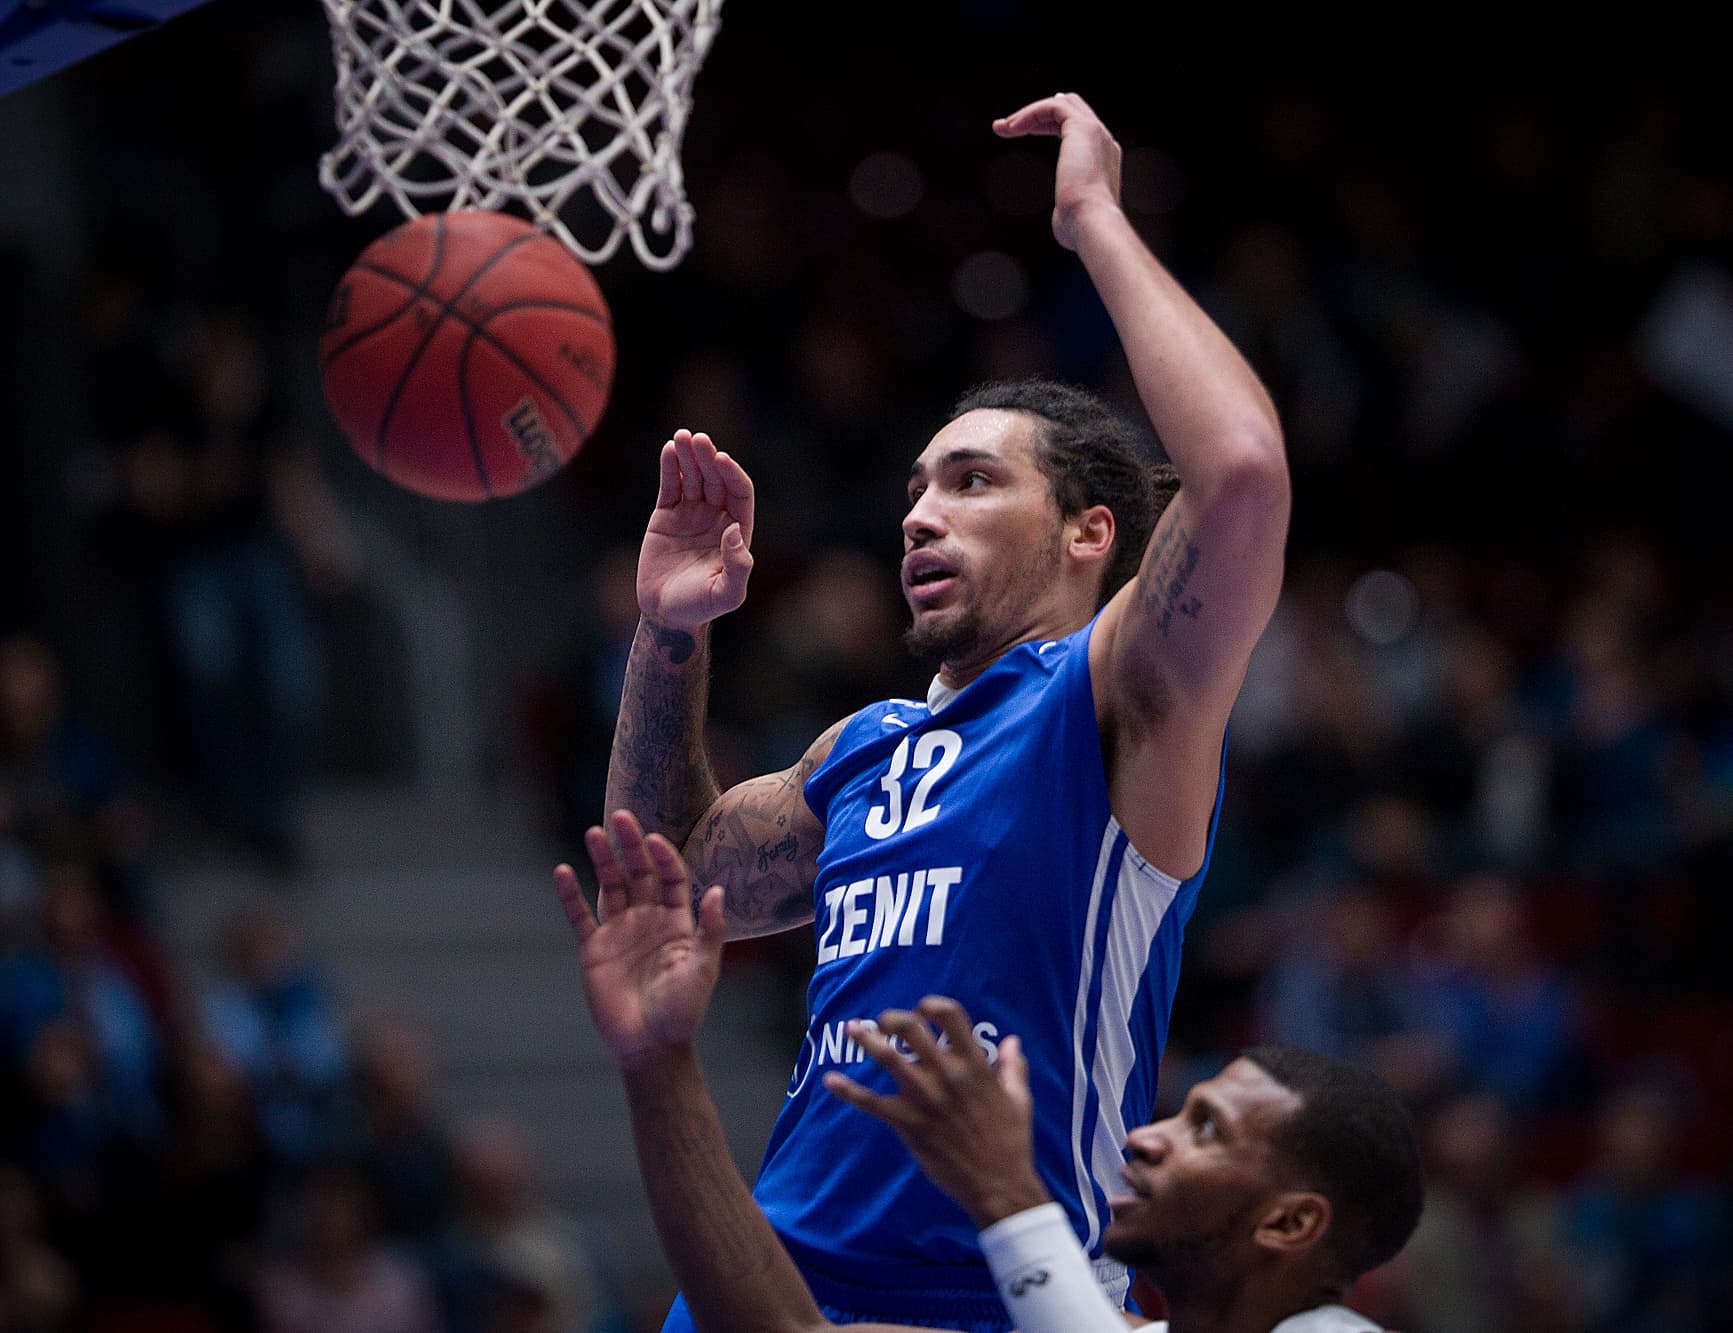 Zenit Streaks To 6th Straight Win, Downs Enisey